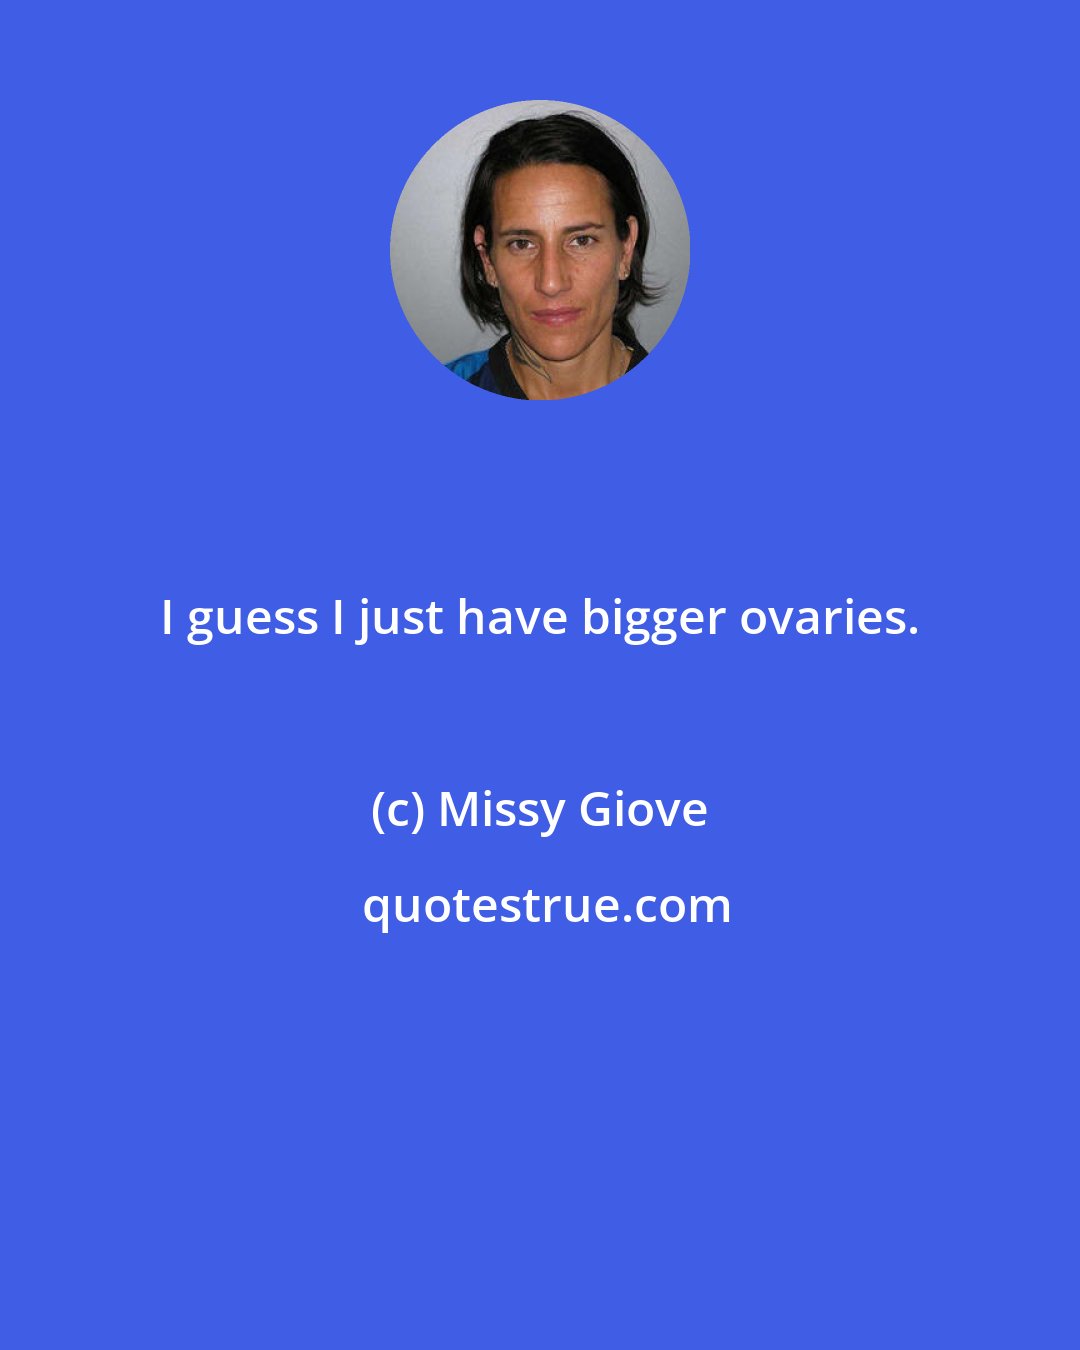 Missy Giove: I guess I just have bigger ovaries.